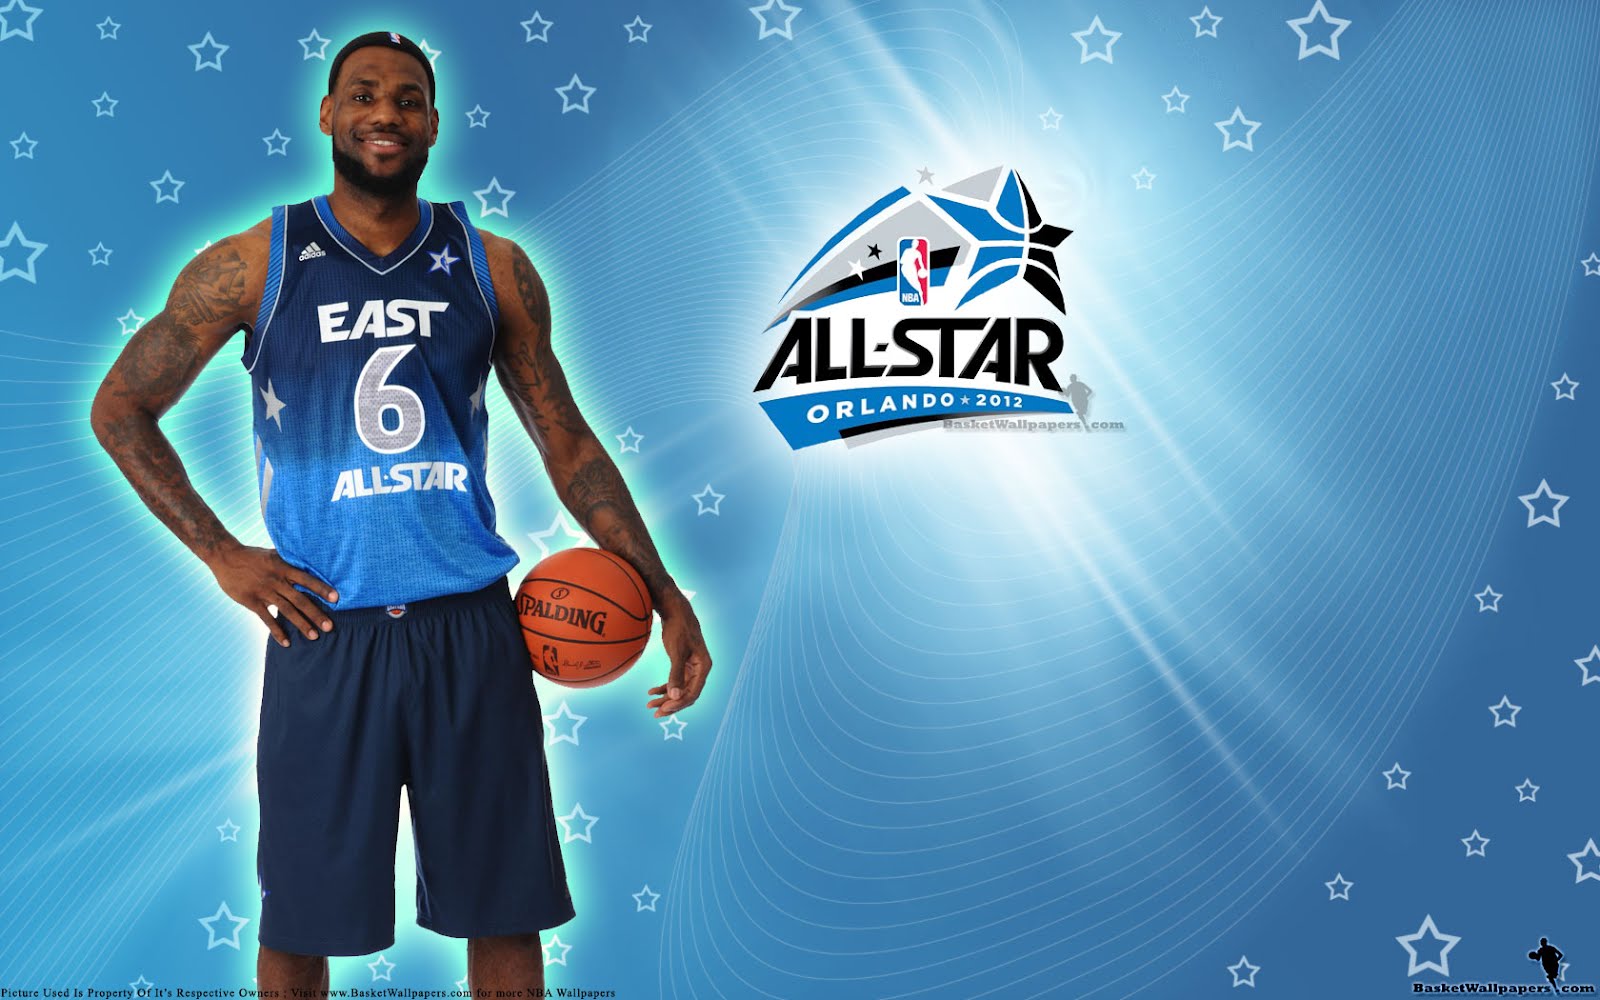 Free download Sport Live EAST 2012 NBA All Star Wallpaper 1600x1000 for your Desktop, Mobile and Tablet Explore 41+ NBA Wallpapers LeBron James Lebron James Wallpaper Dunk, Nba Wallpapers Lebron